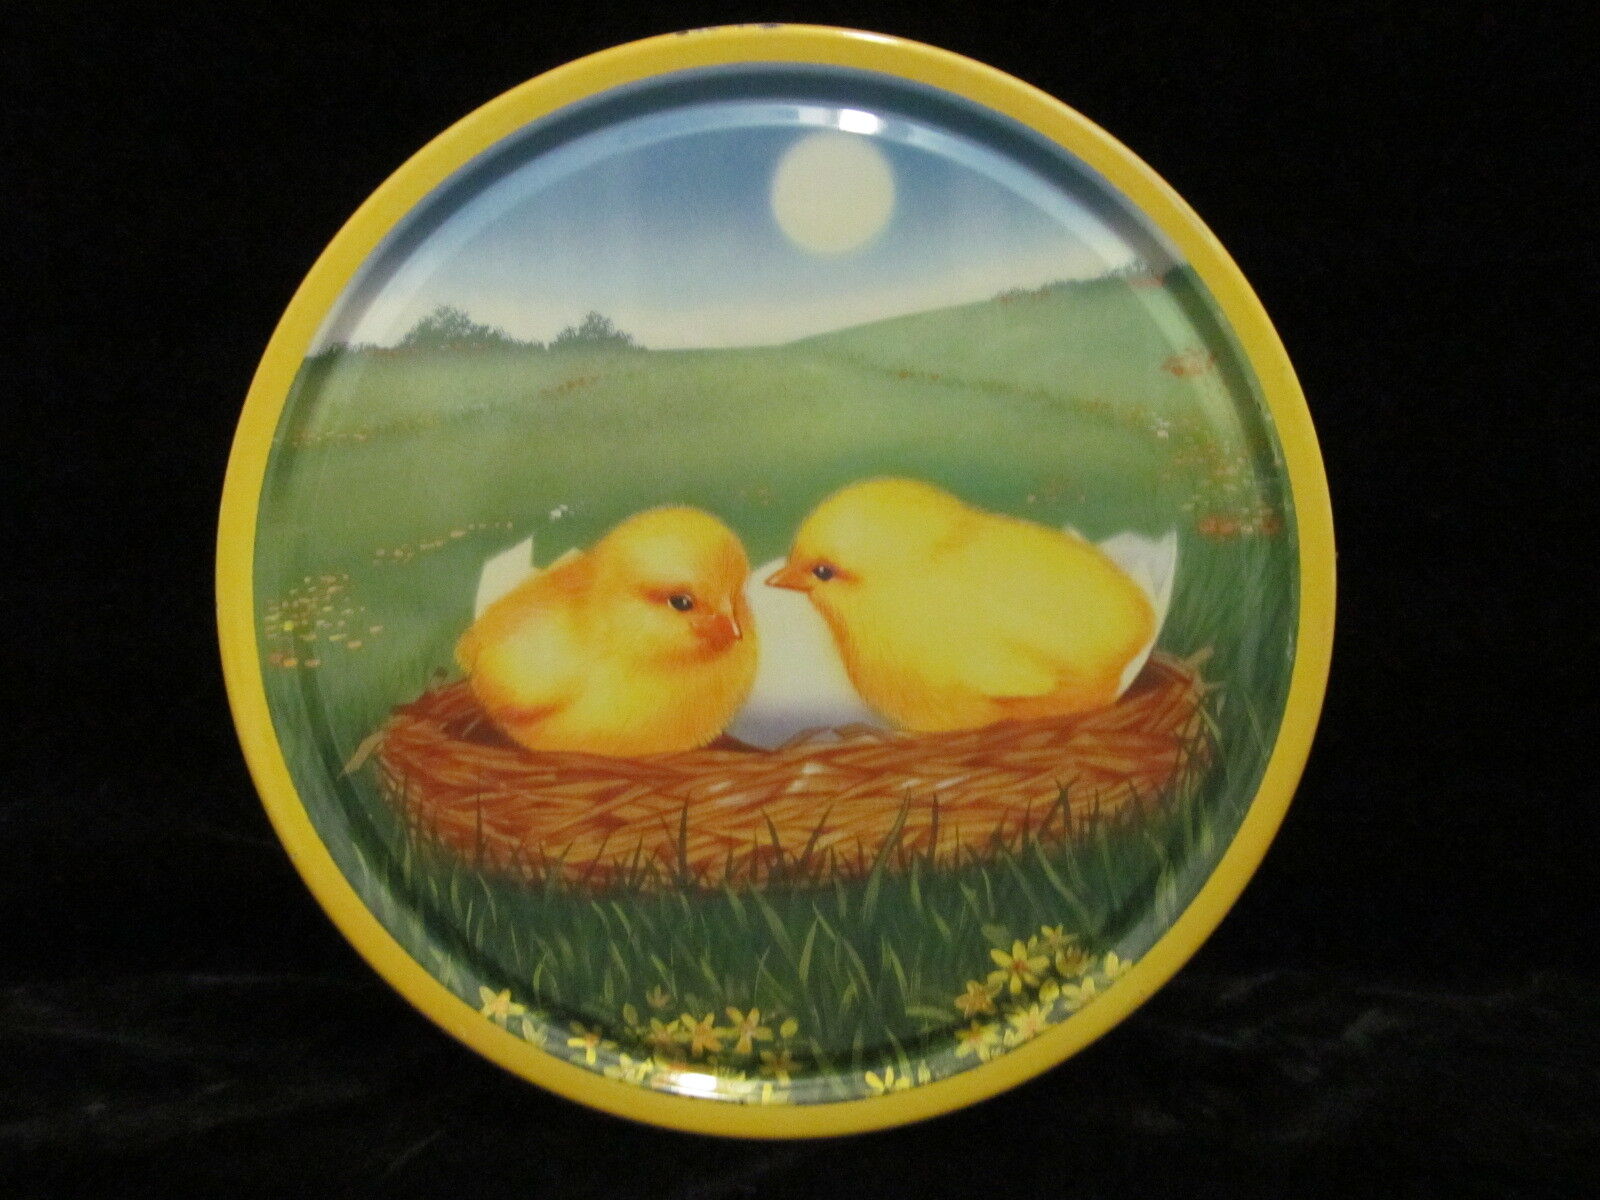 VTG EASTER-BABY CHICKS METAL/TIN CANDY/COOKIE CONTAINER-DANSK BISCUIT-DENMARK